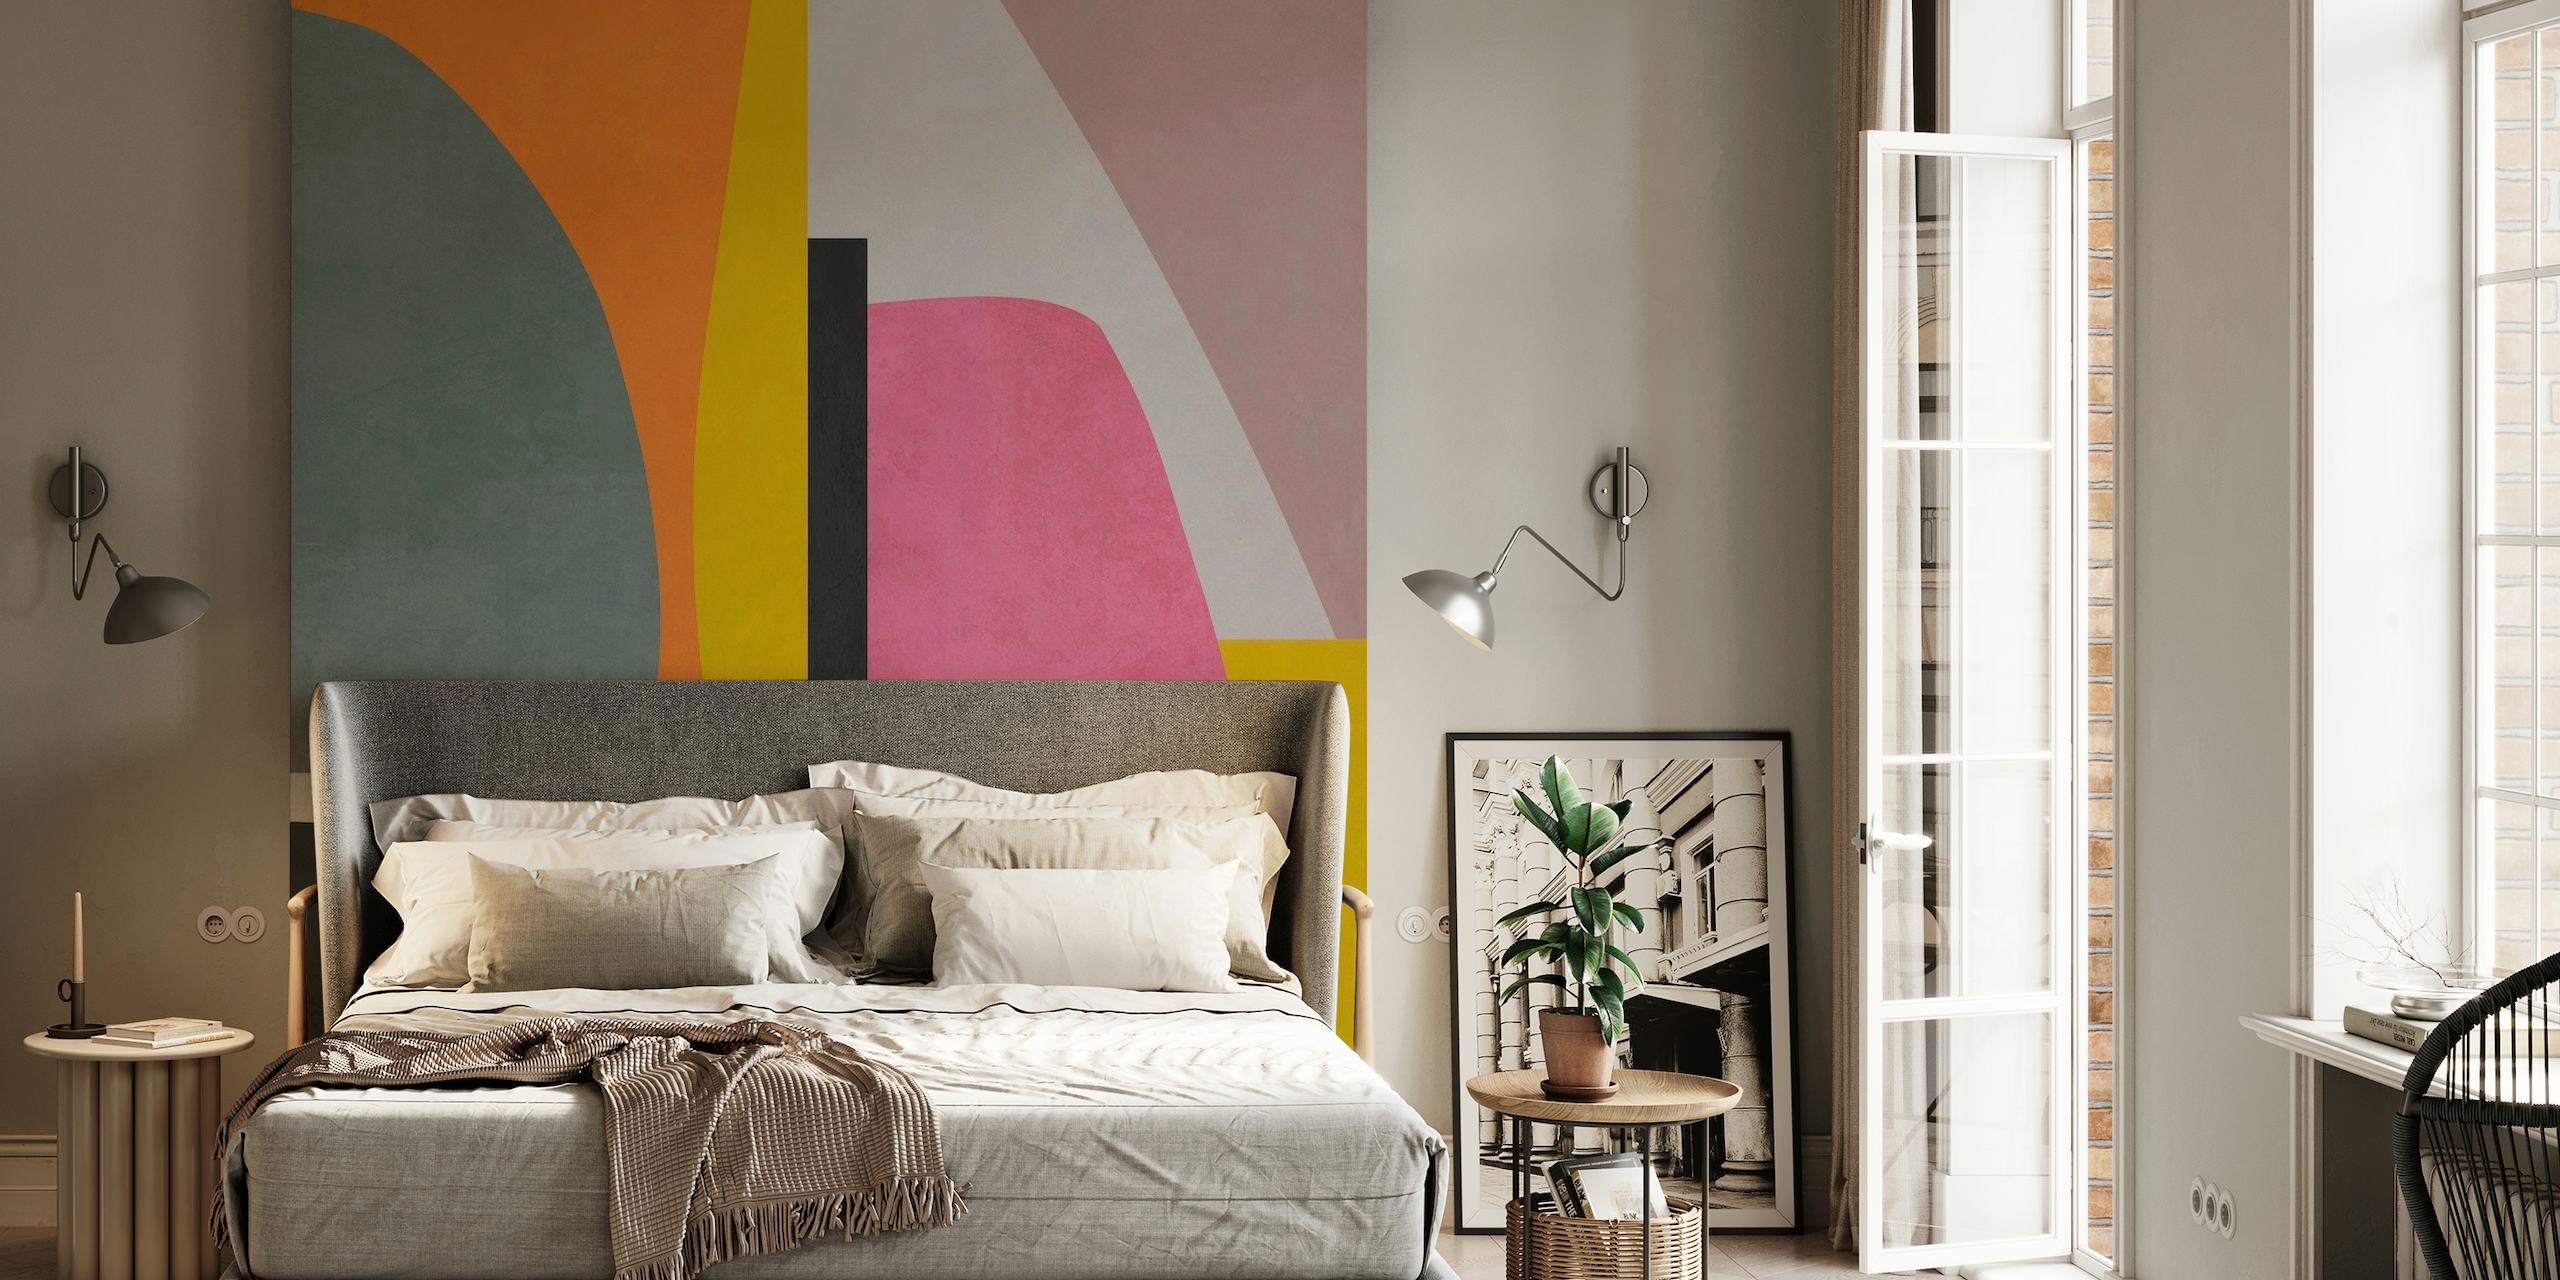 Abstract geometric shapes wall mural with playful colors on happywall.com